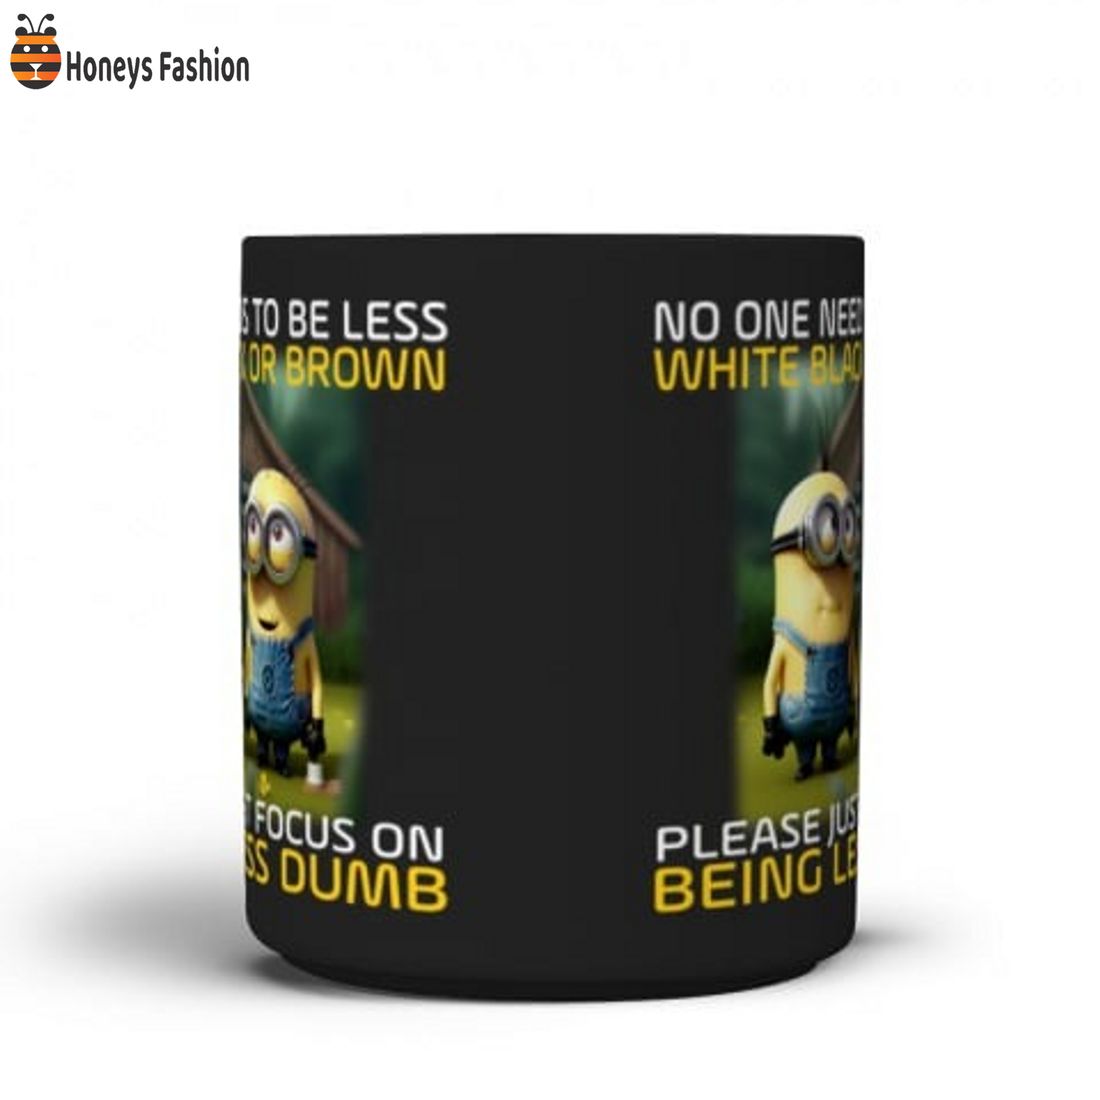 Minions no one need to be less white black or brown mug